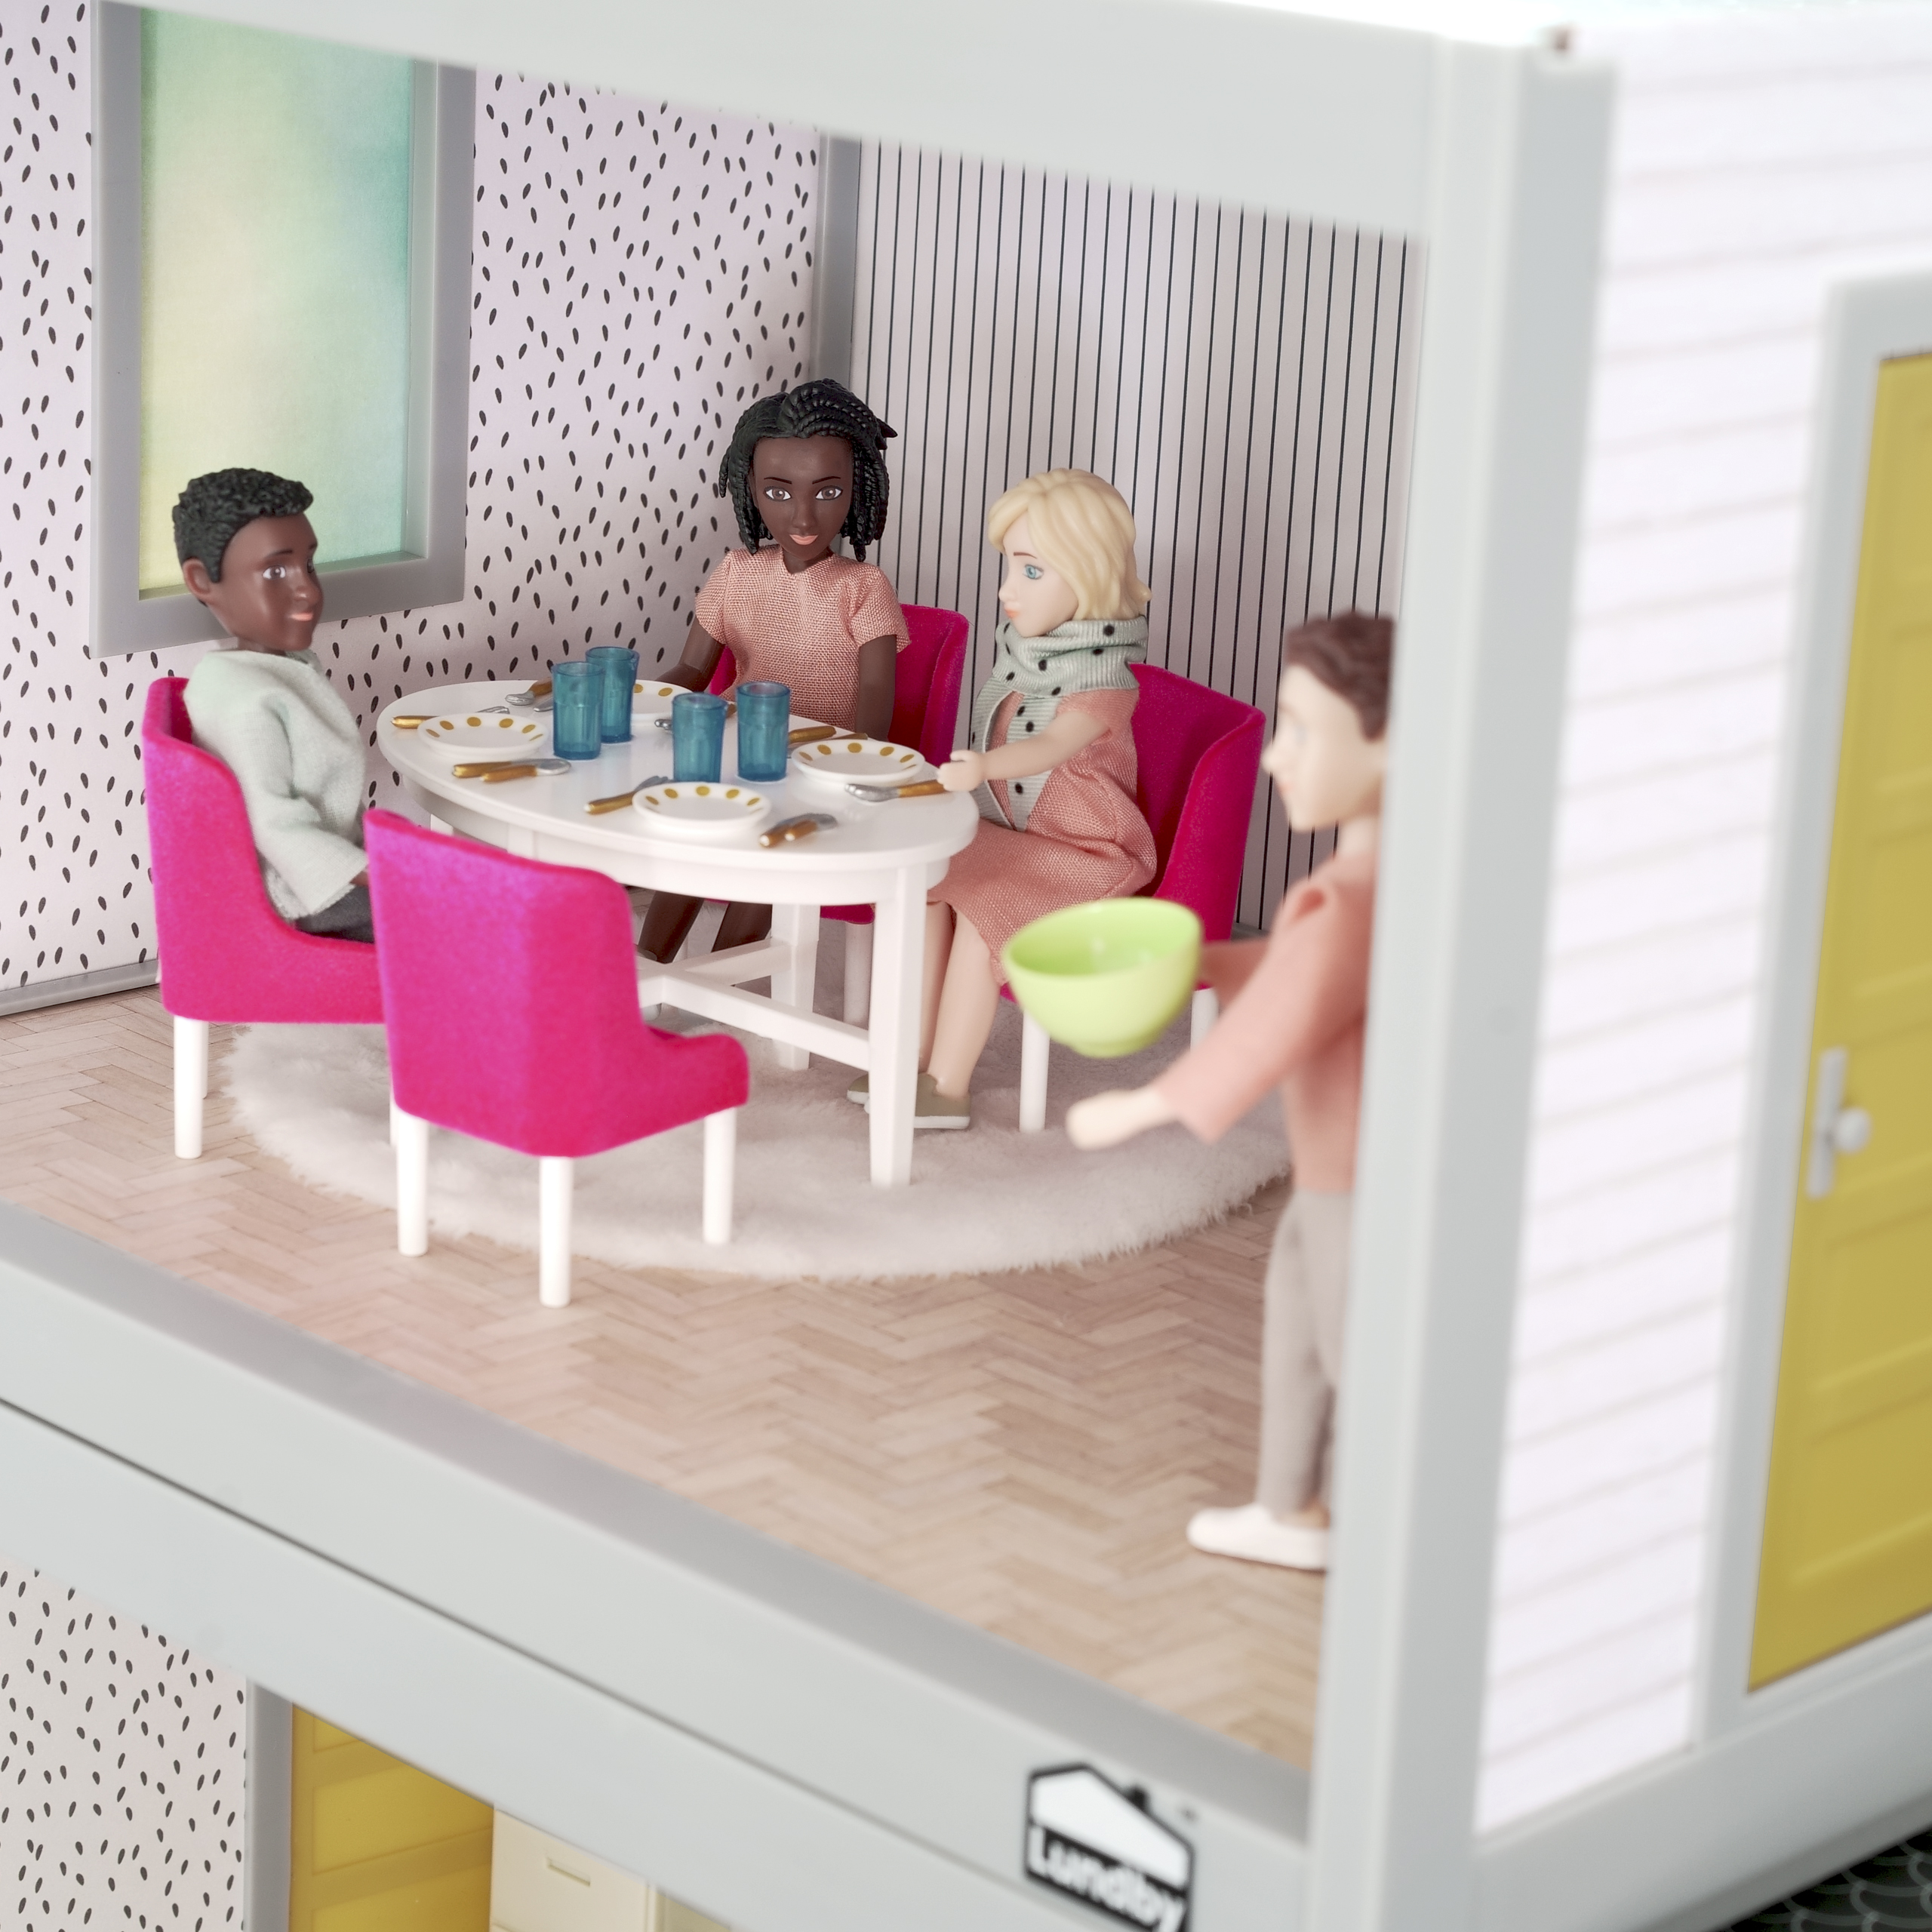 Doll house furniture & doll house accessories lundby dollhouse furniture dining table cerise